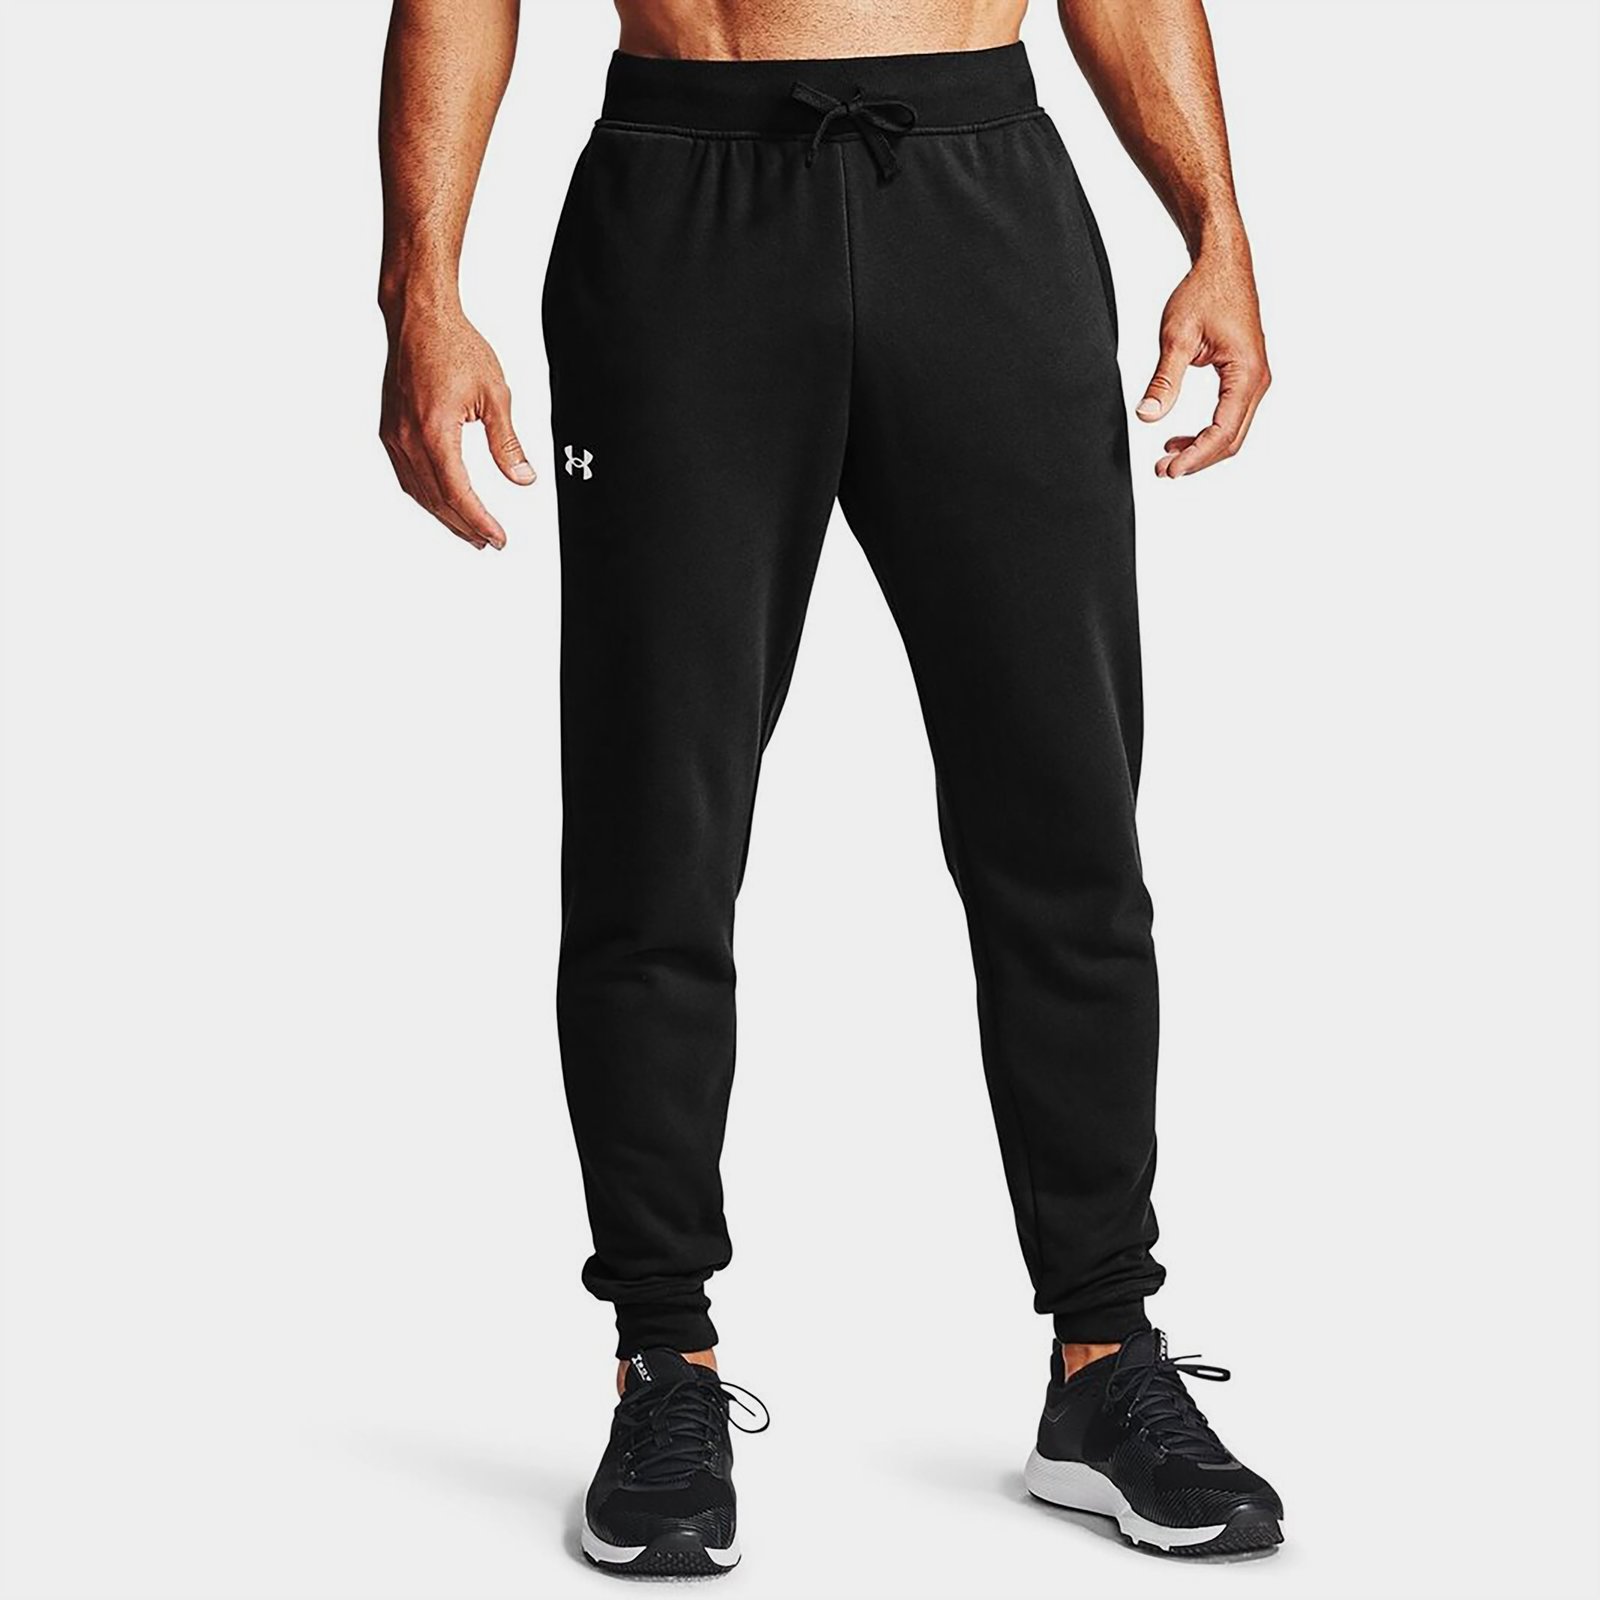 ZLC Gym Pants, fitted, soft and tailored to fit wherever you go